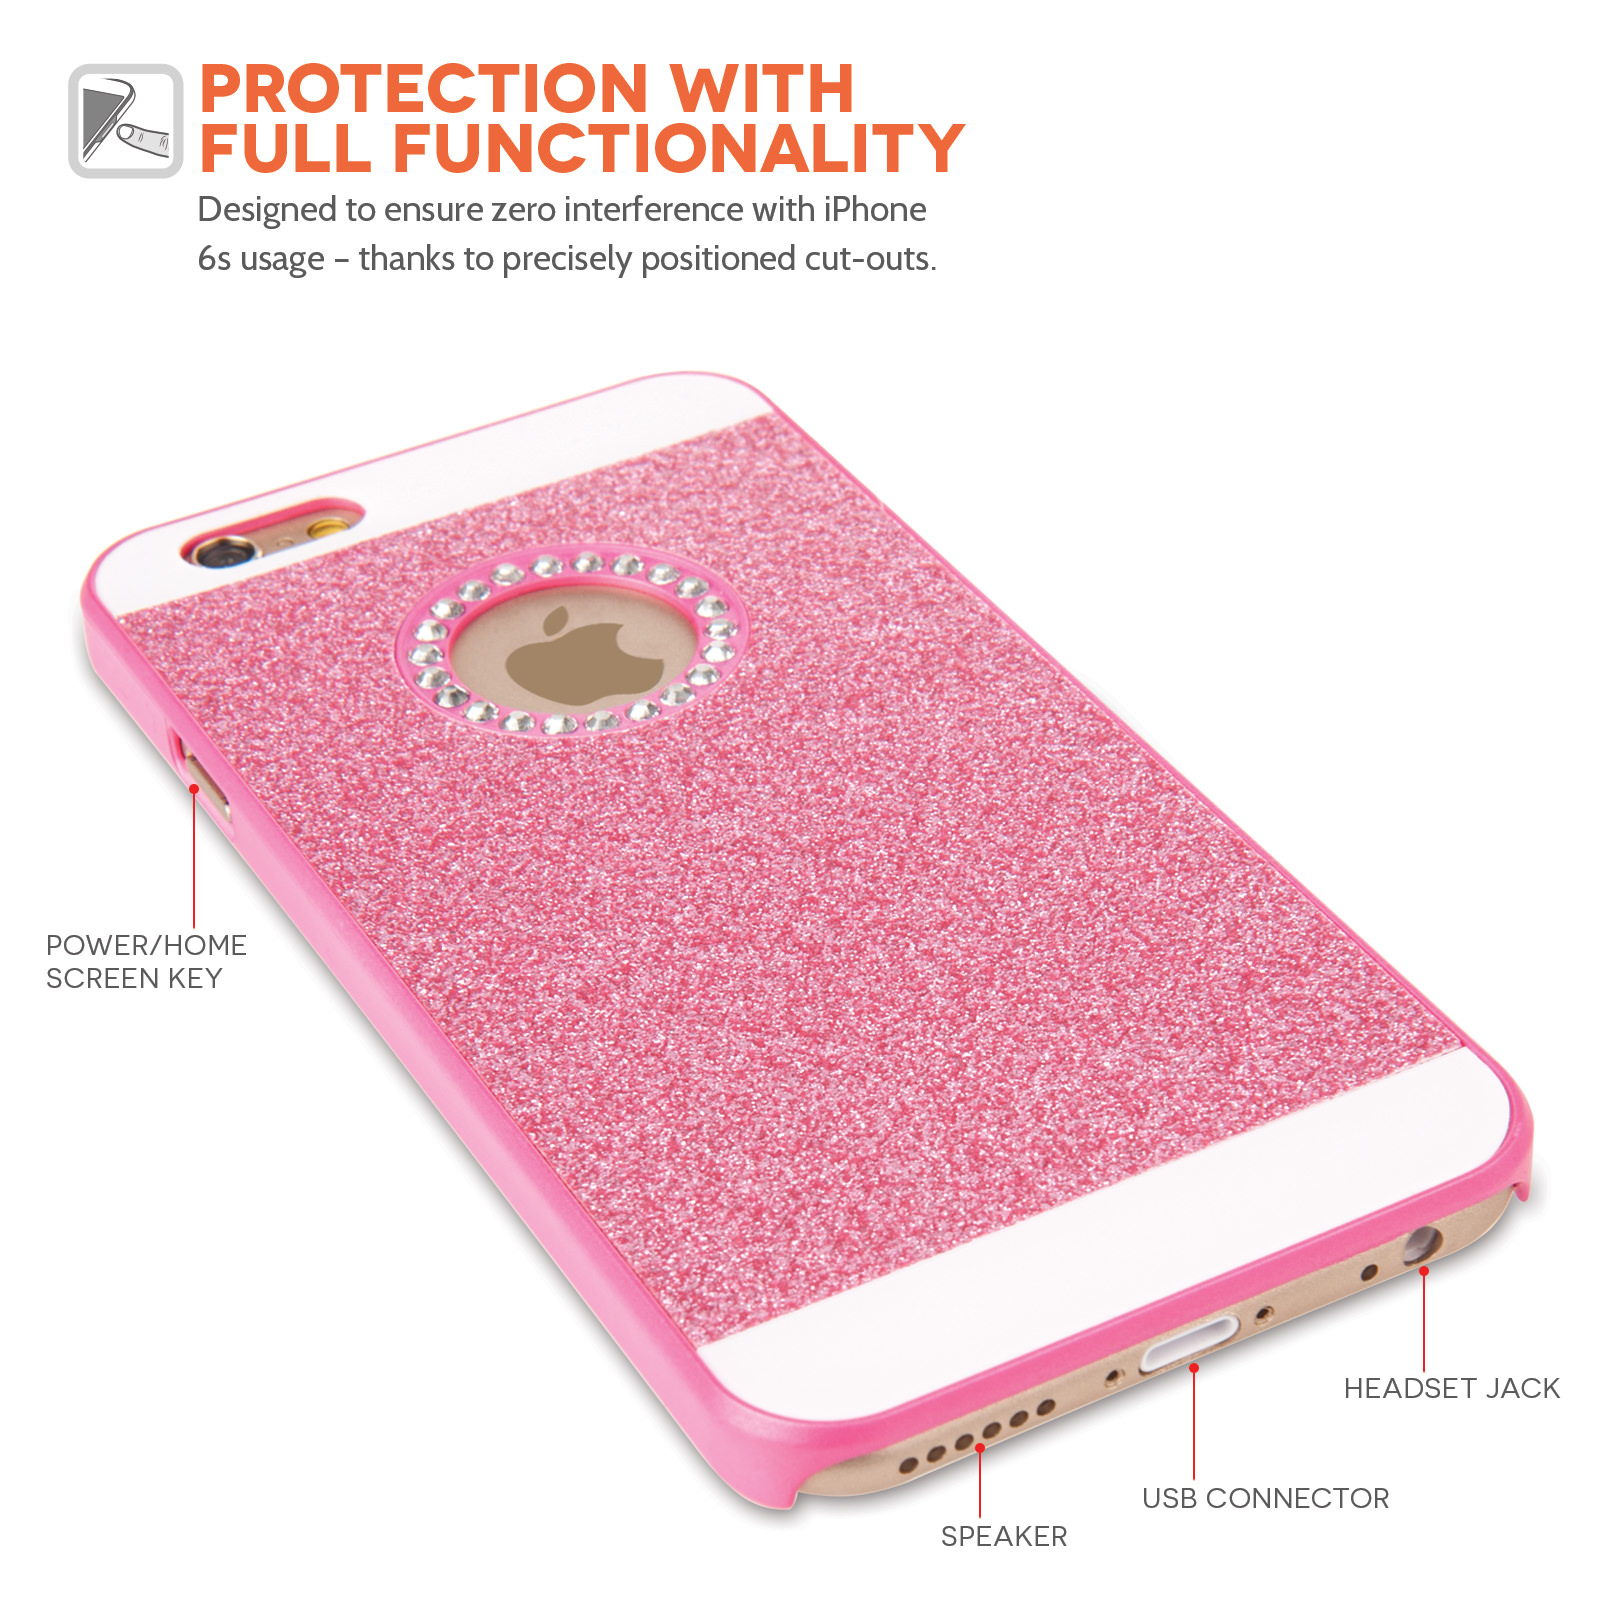 Yousave Accessories iPhone 6 and 6s Flash Diamond Case - Pink